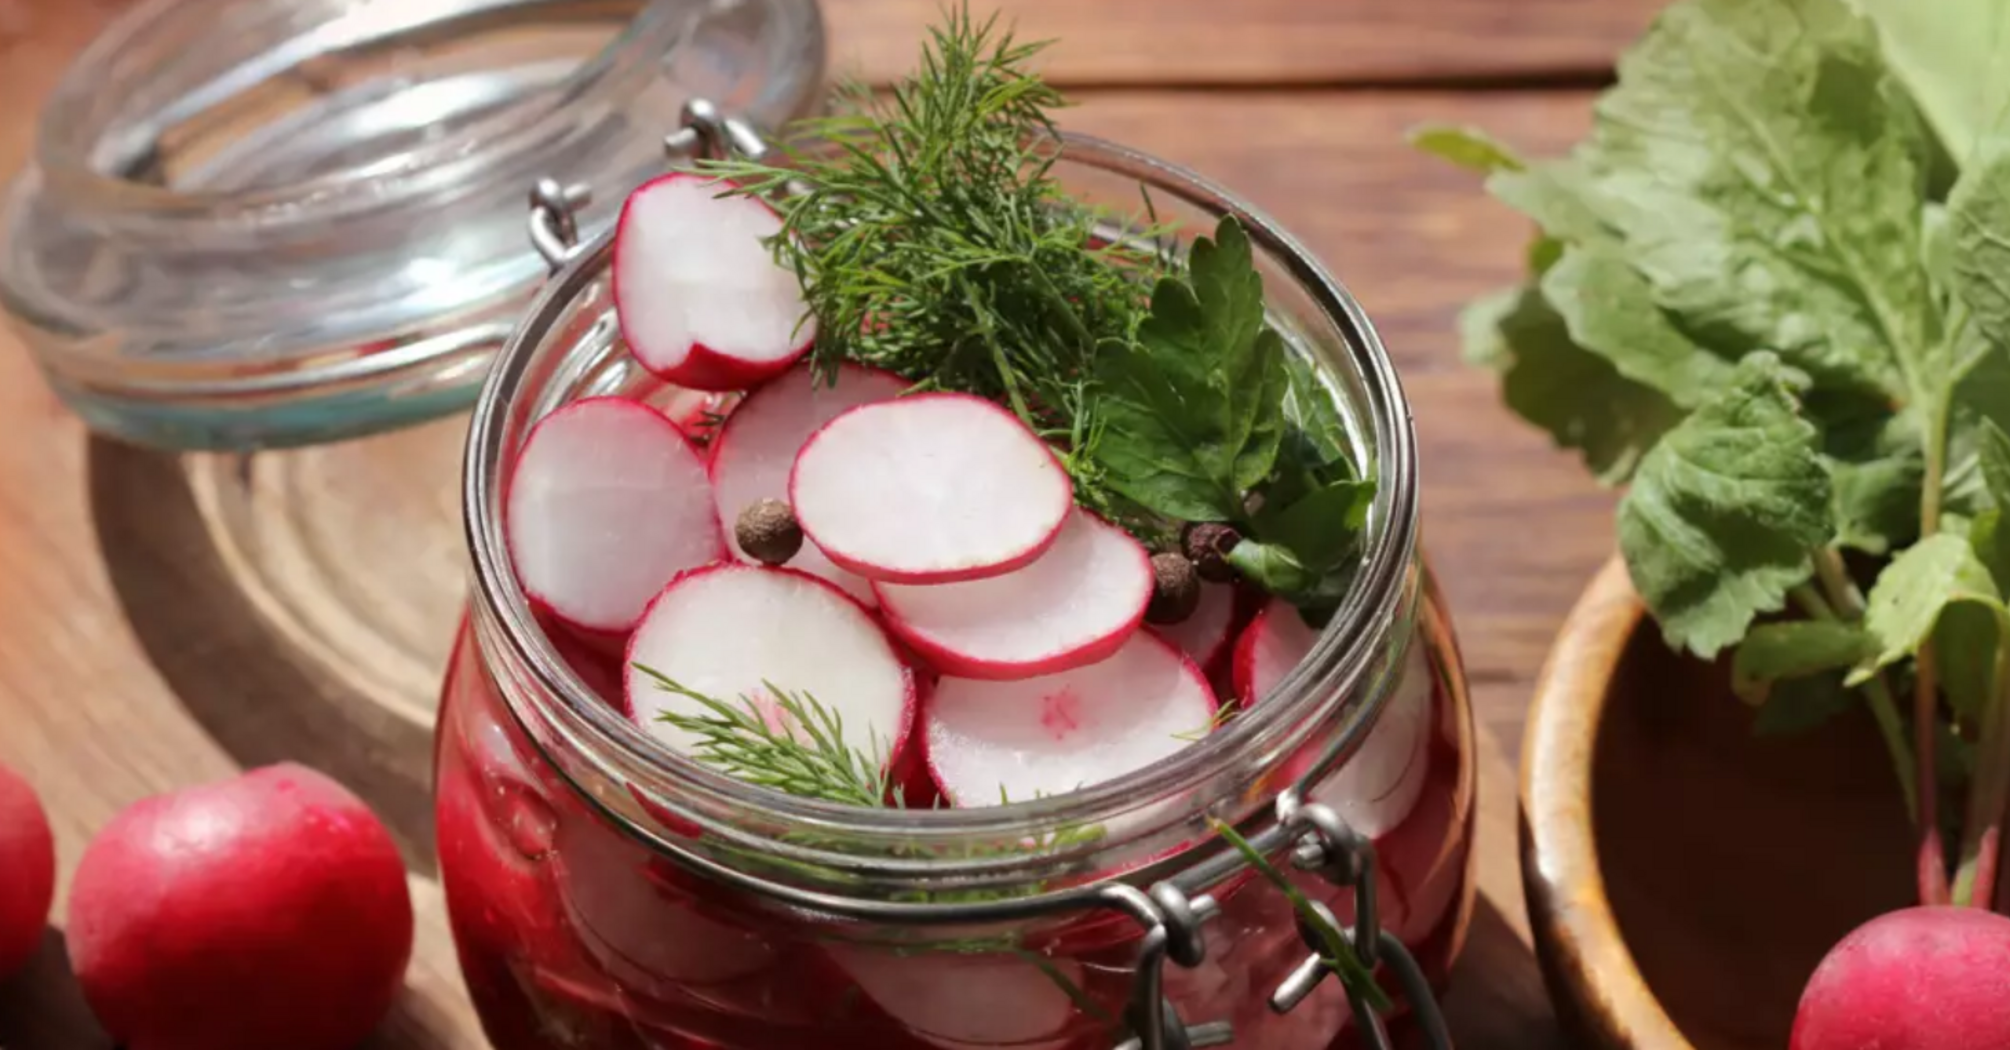 Pickled radish in a day: how to cook to make it crispy and juicy | OBOZ.UA